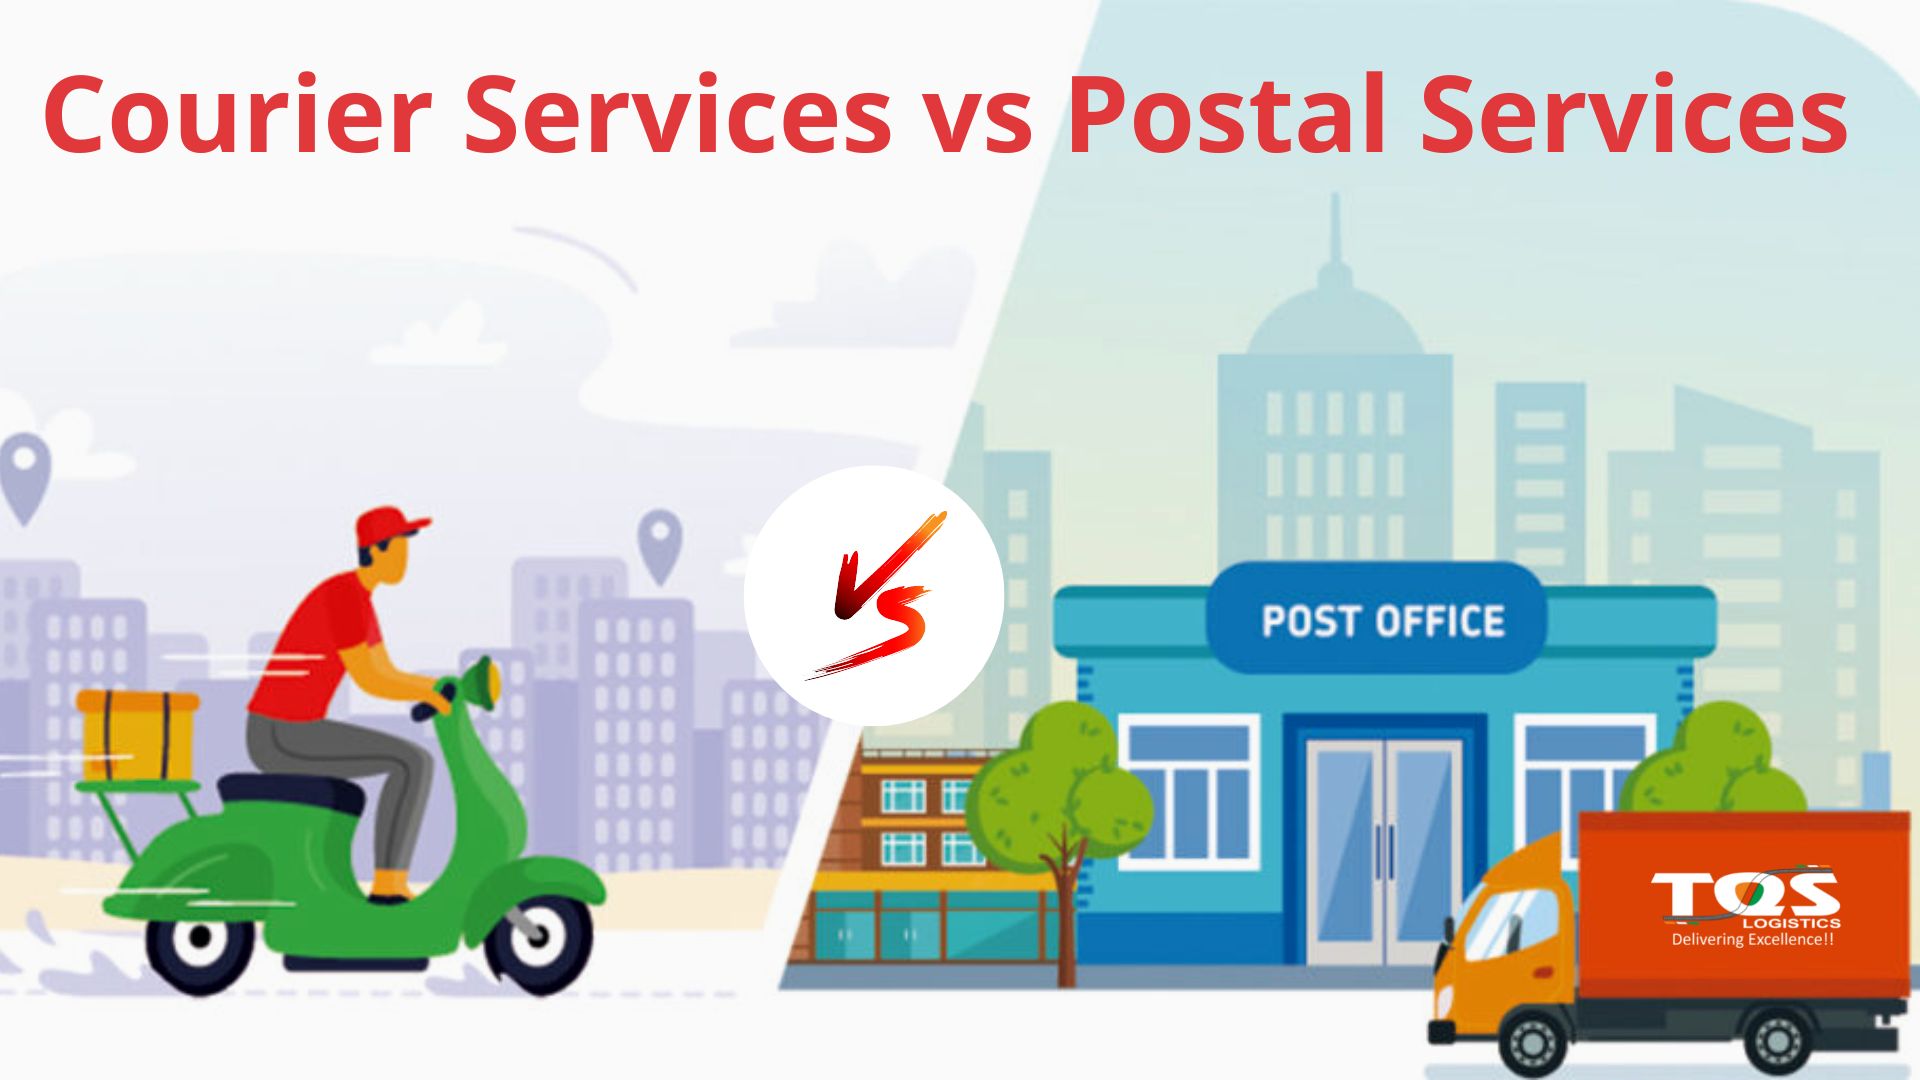 What Are the Benefits of Courier Services vs. Postal Services?